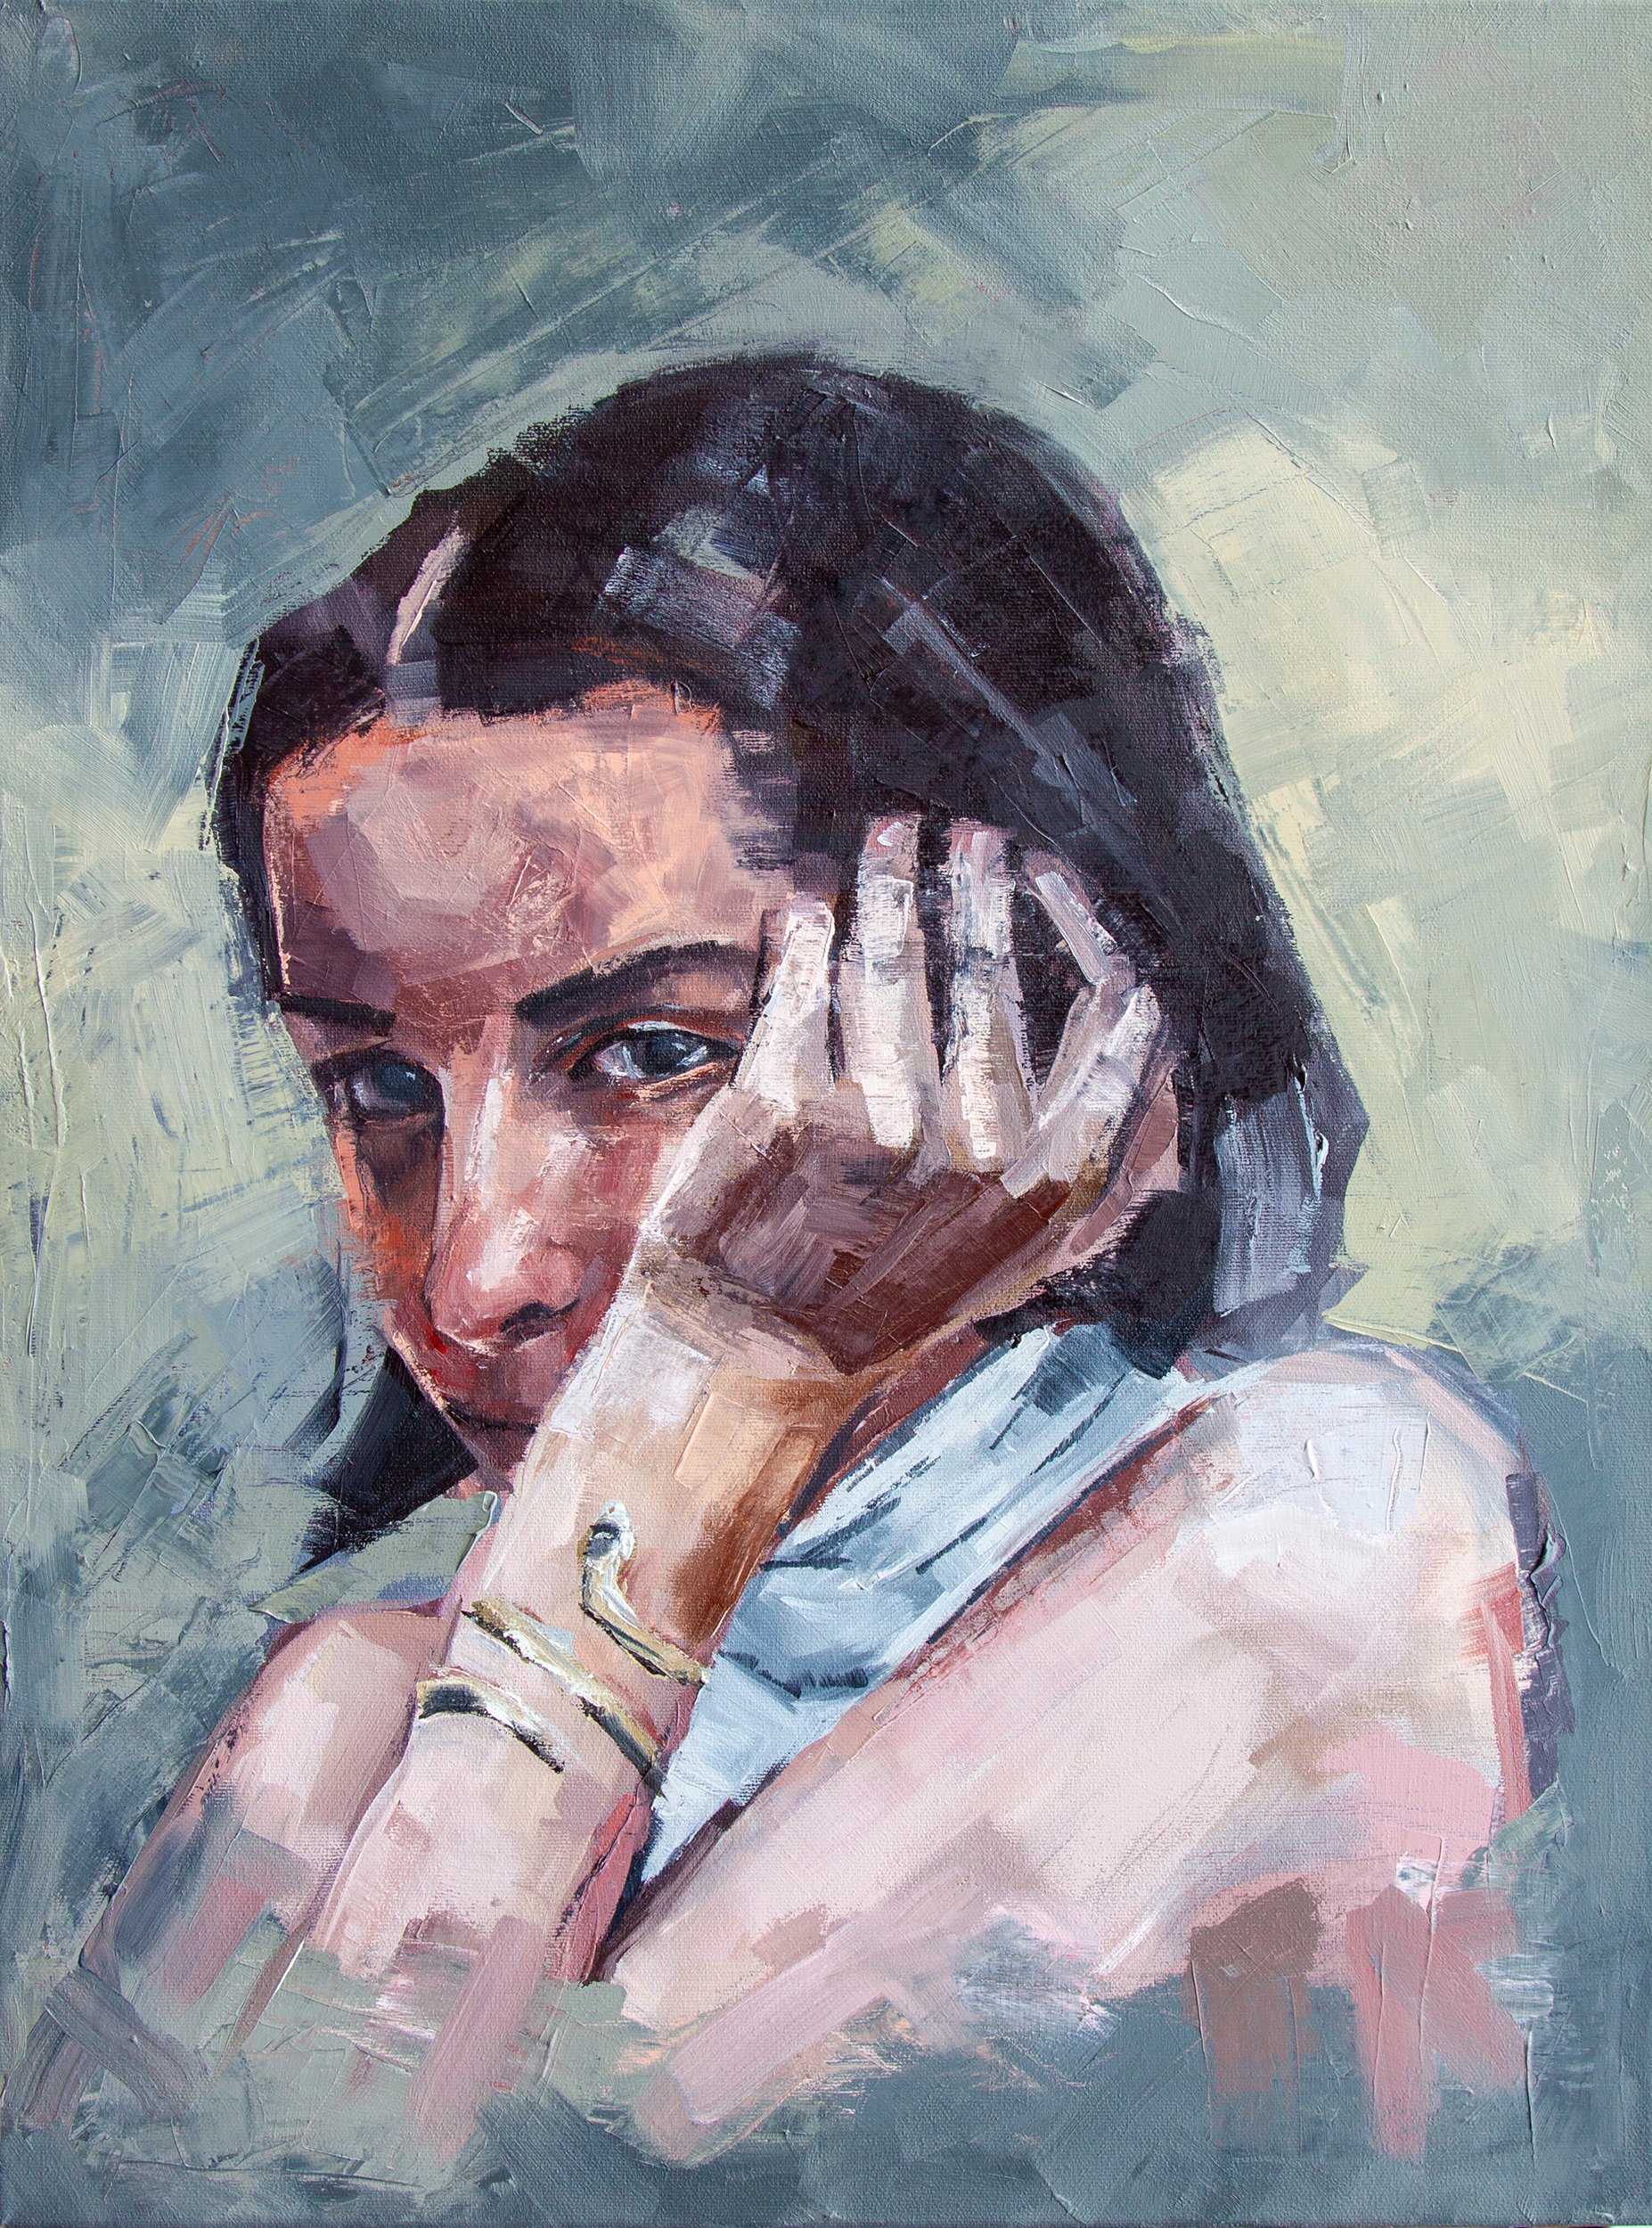 Marta Portrait - oil painting, 24 x 18 inches, AVAILABLE